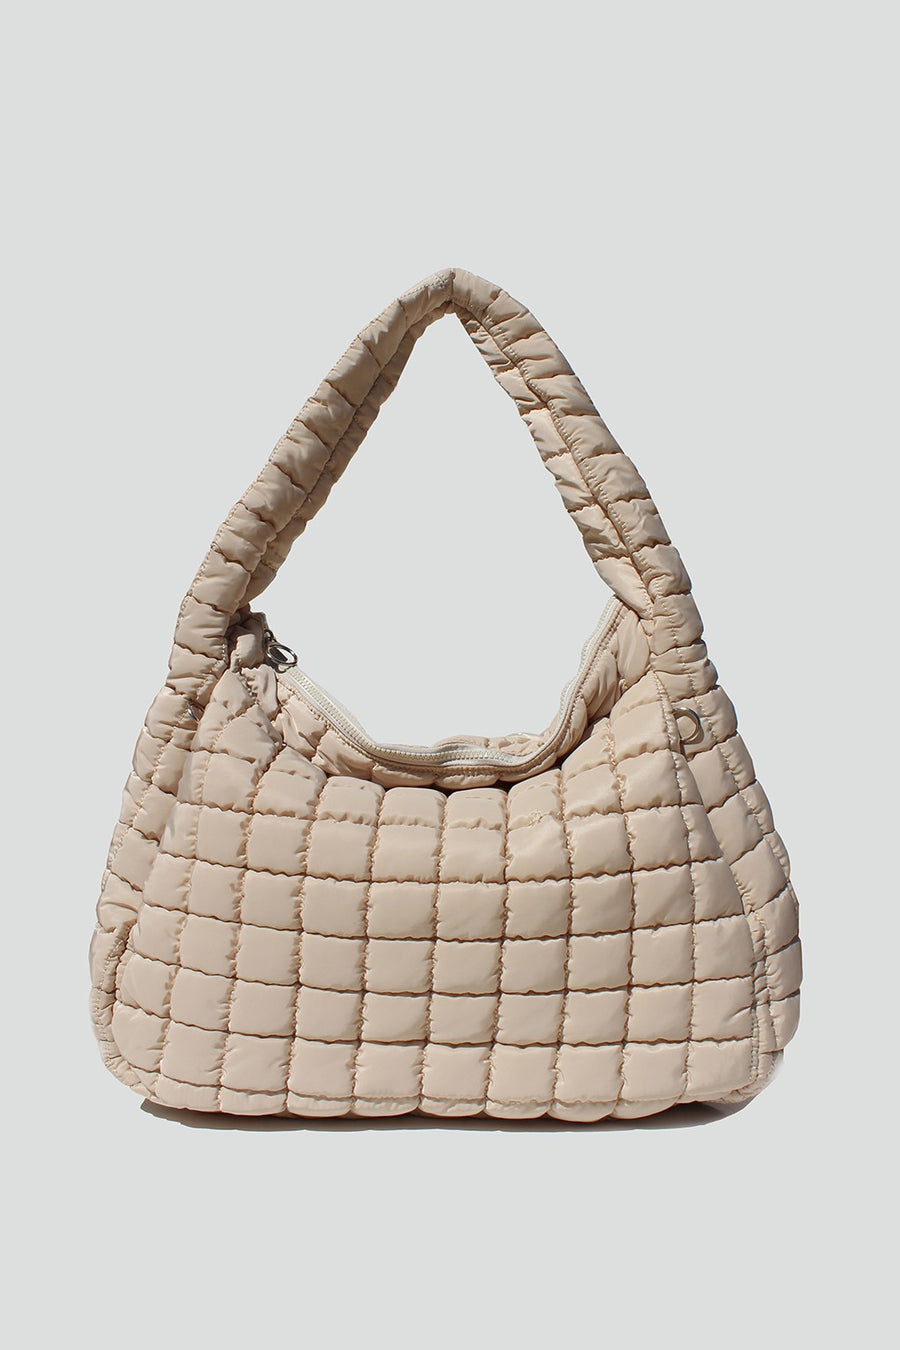 Ivory small tote bag. 